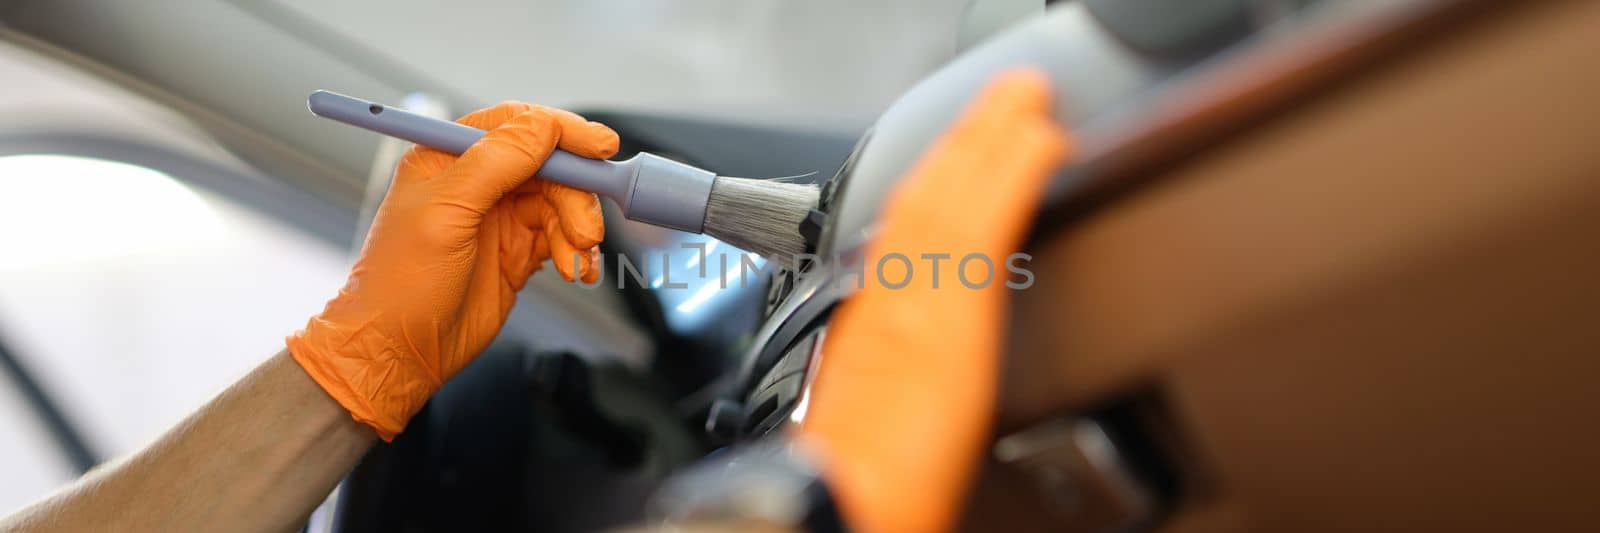 Master repairman cleans the car air conditioner with brush in workshop closeup. Dry cleaning of car interior concept